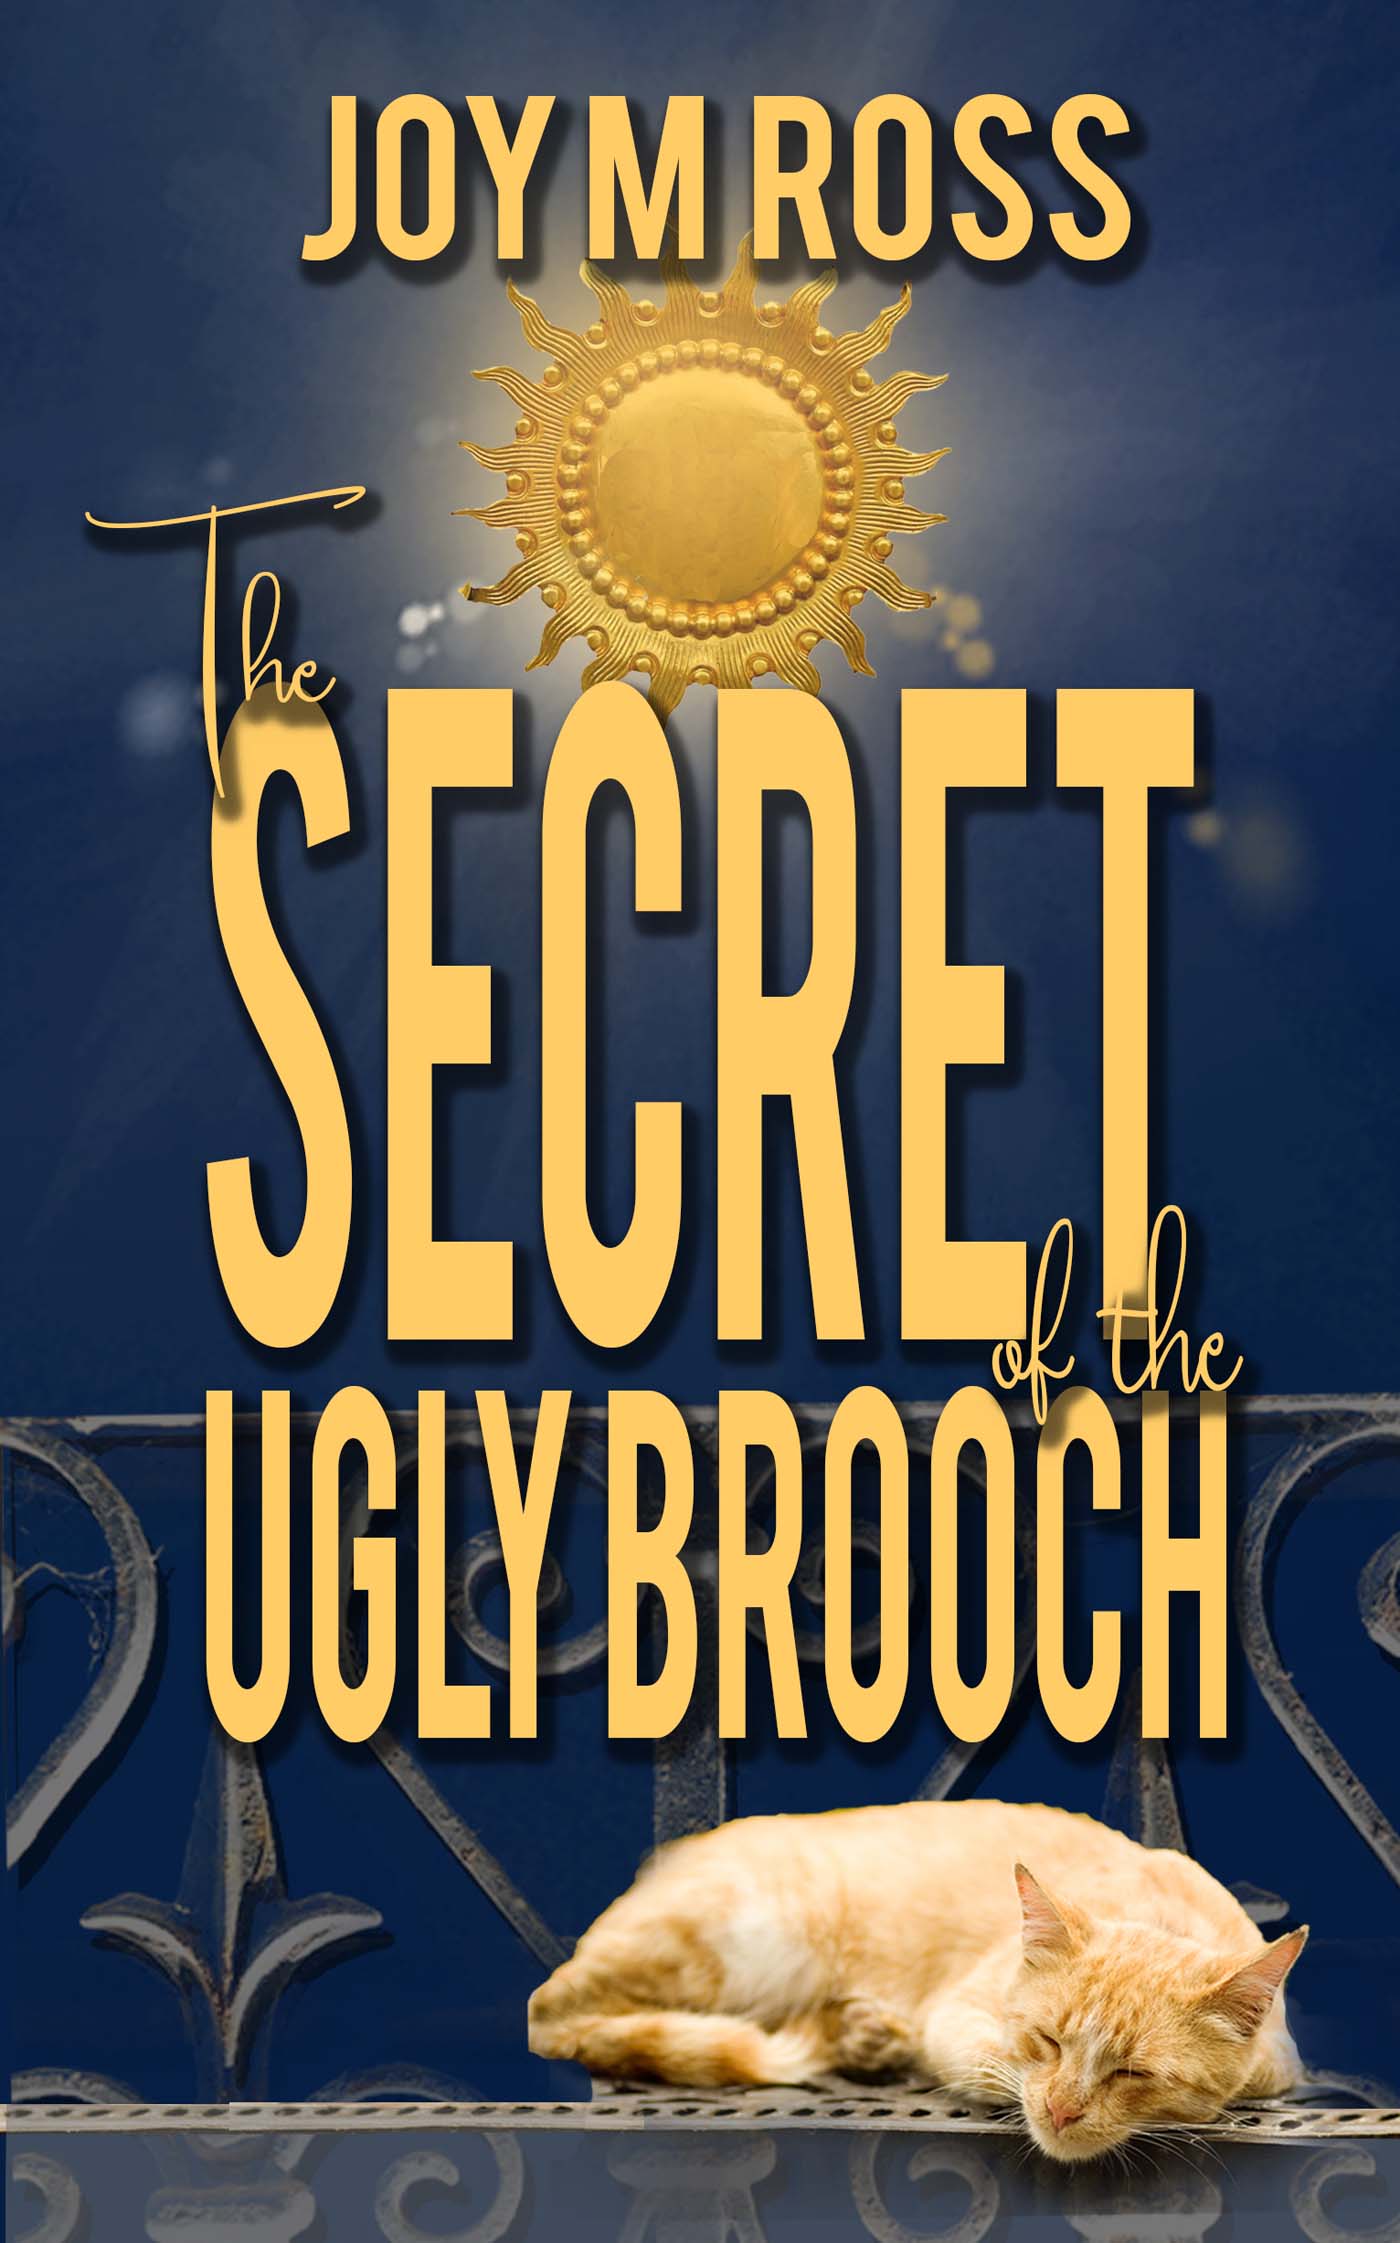 The Secret of the Ugly Brooch